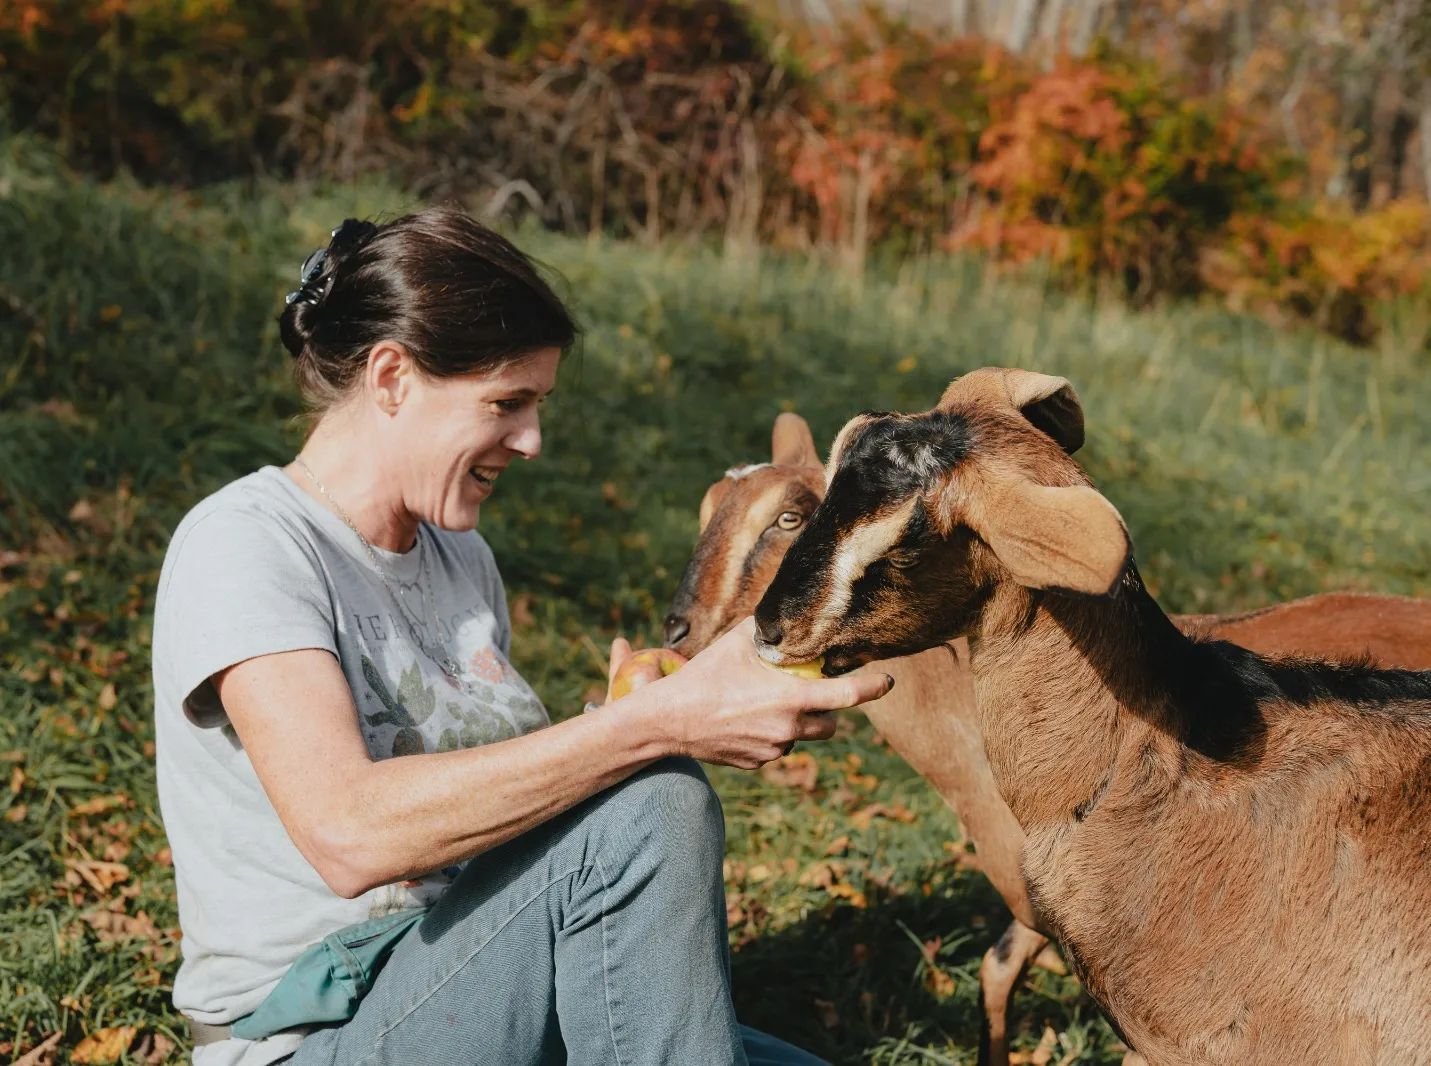 Allow us to introduce the charming Meagan Fredrick, fondly known as the goat mother at Hemlock Neversink and founder of @frederickfarmgoats. The resident goats have captured hearts since day one, becoming a beloved highlight for our guests. Spending 